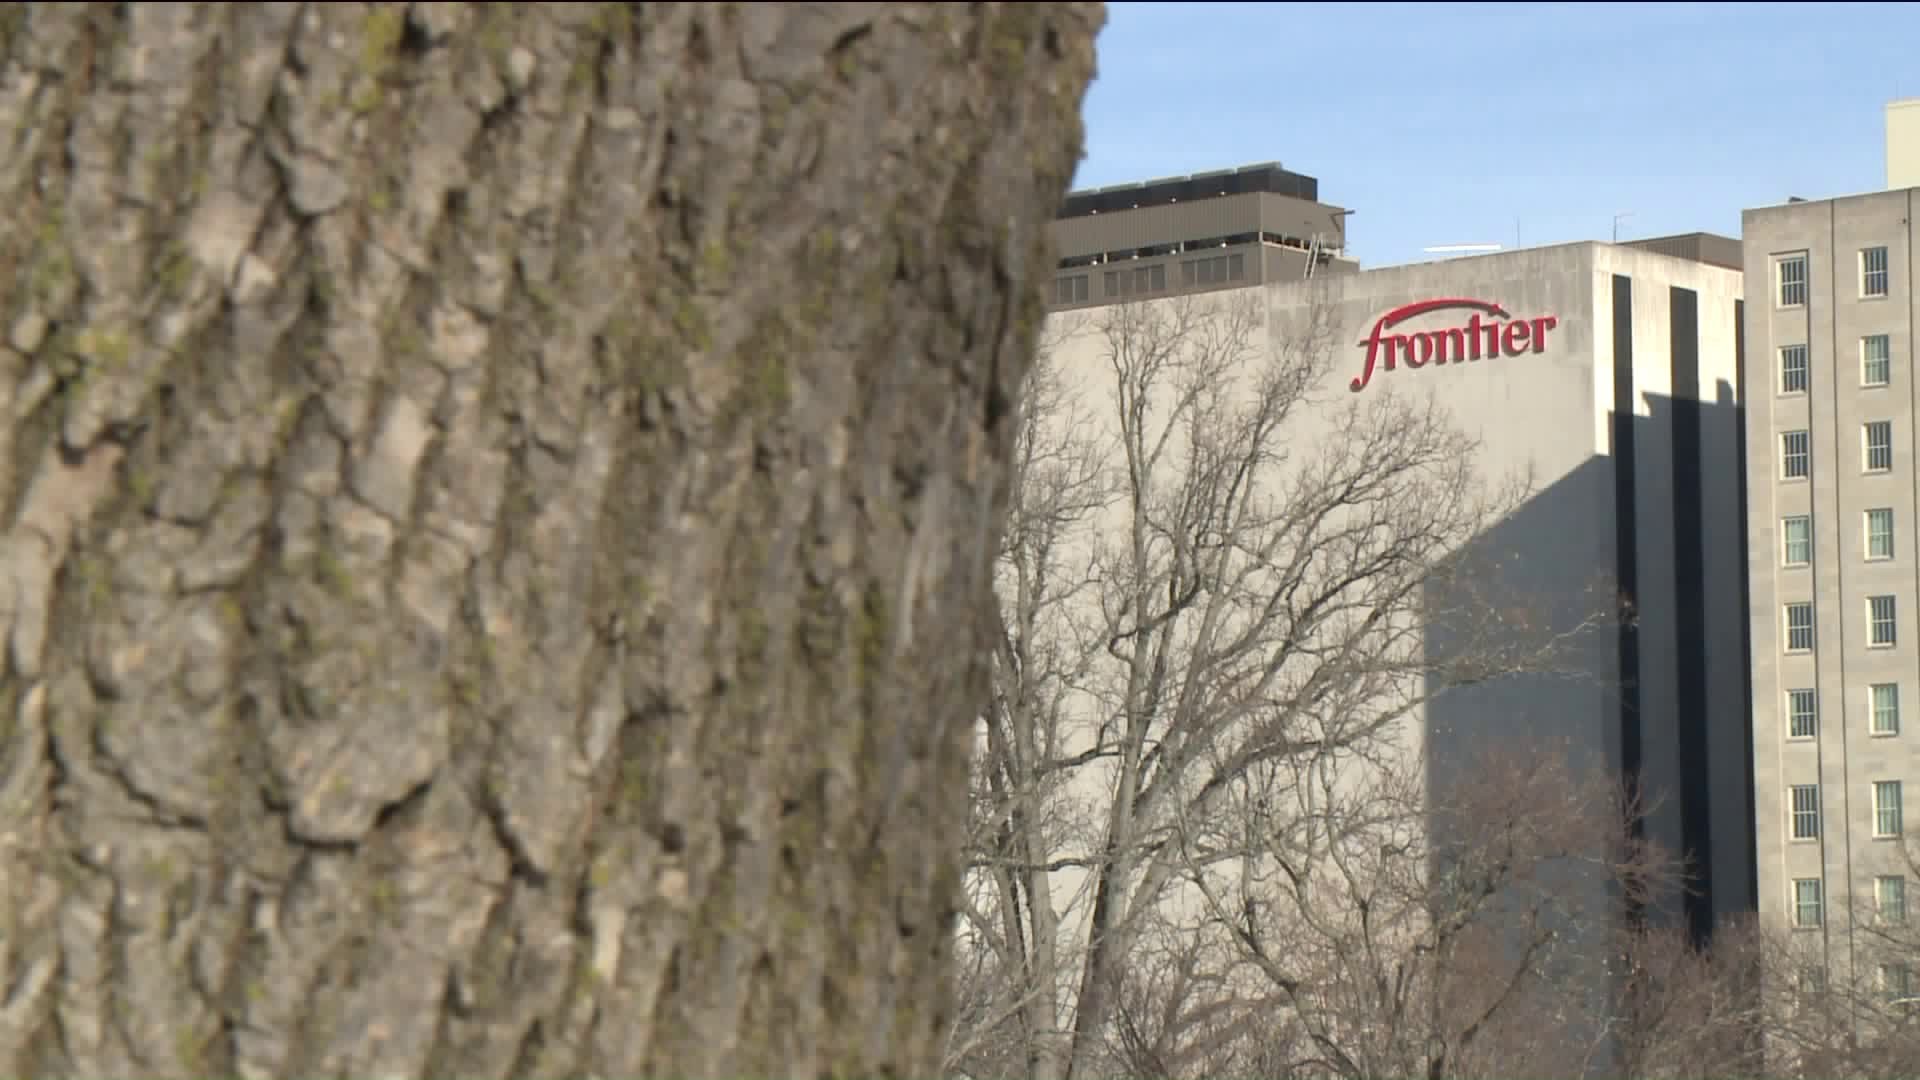 Workers worry as Norwalk based Frontier Communications eyes bankruptcy